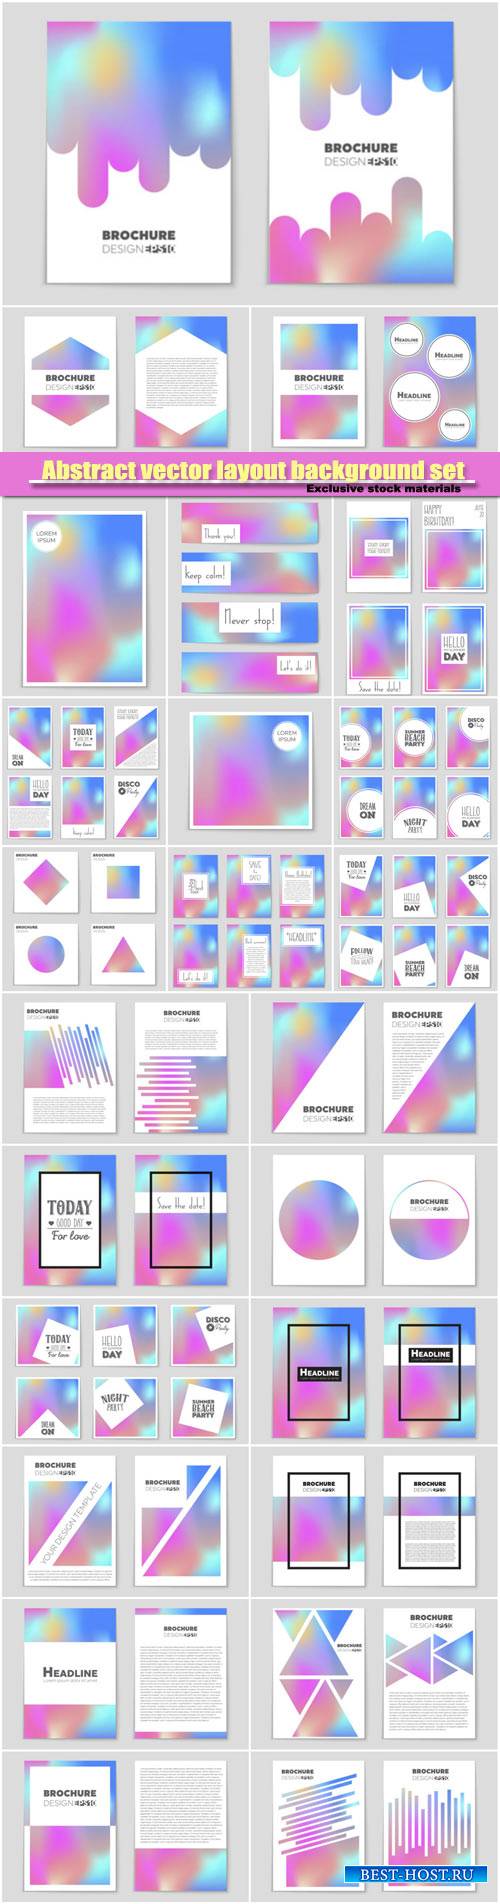 Abstract vector layout background set, template design, brochure and card s ...